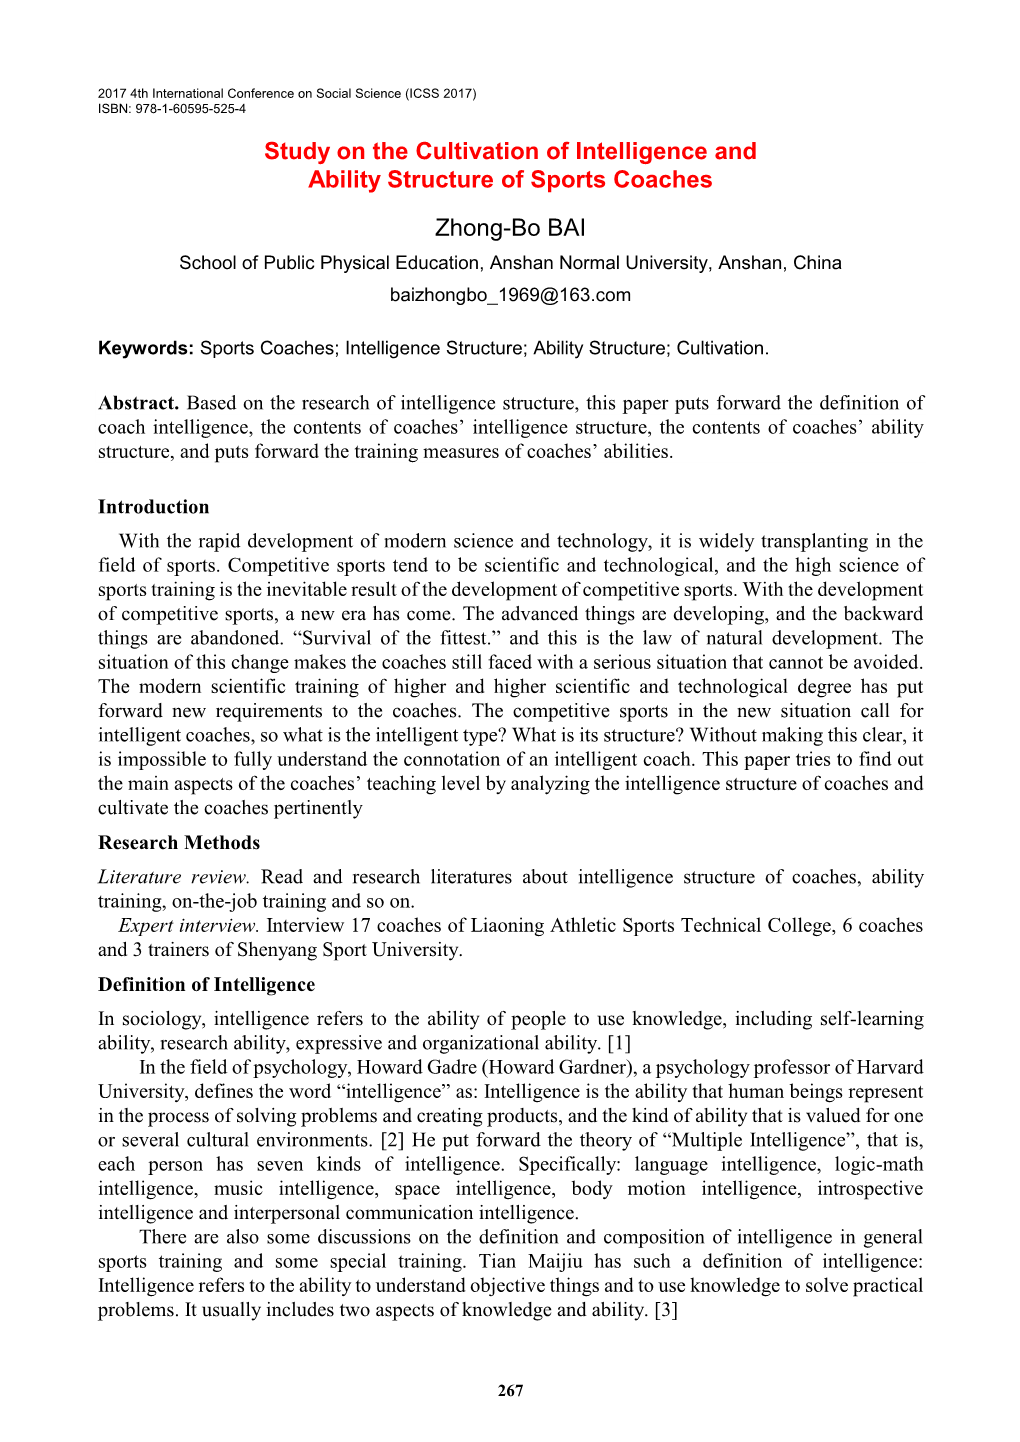 Study on the Cultivation of Intelligence and Ability Structure of Sports Coaches